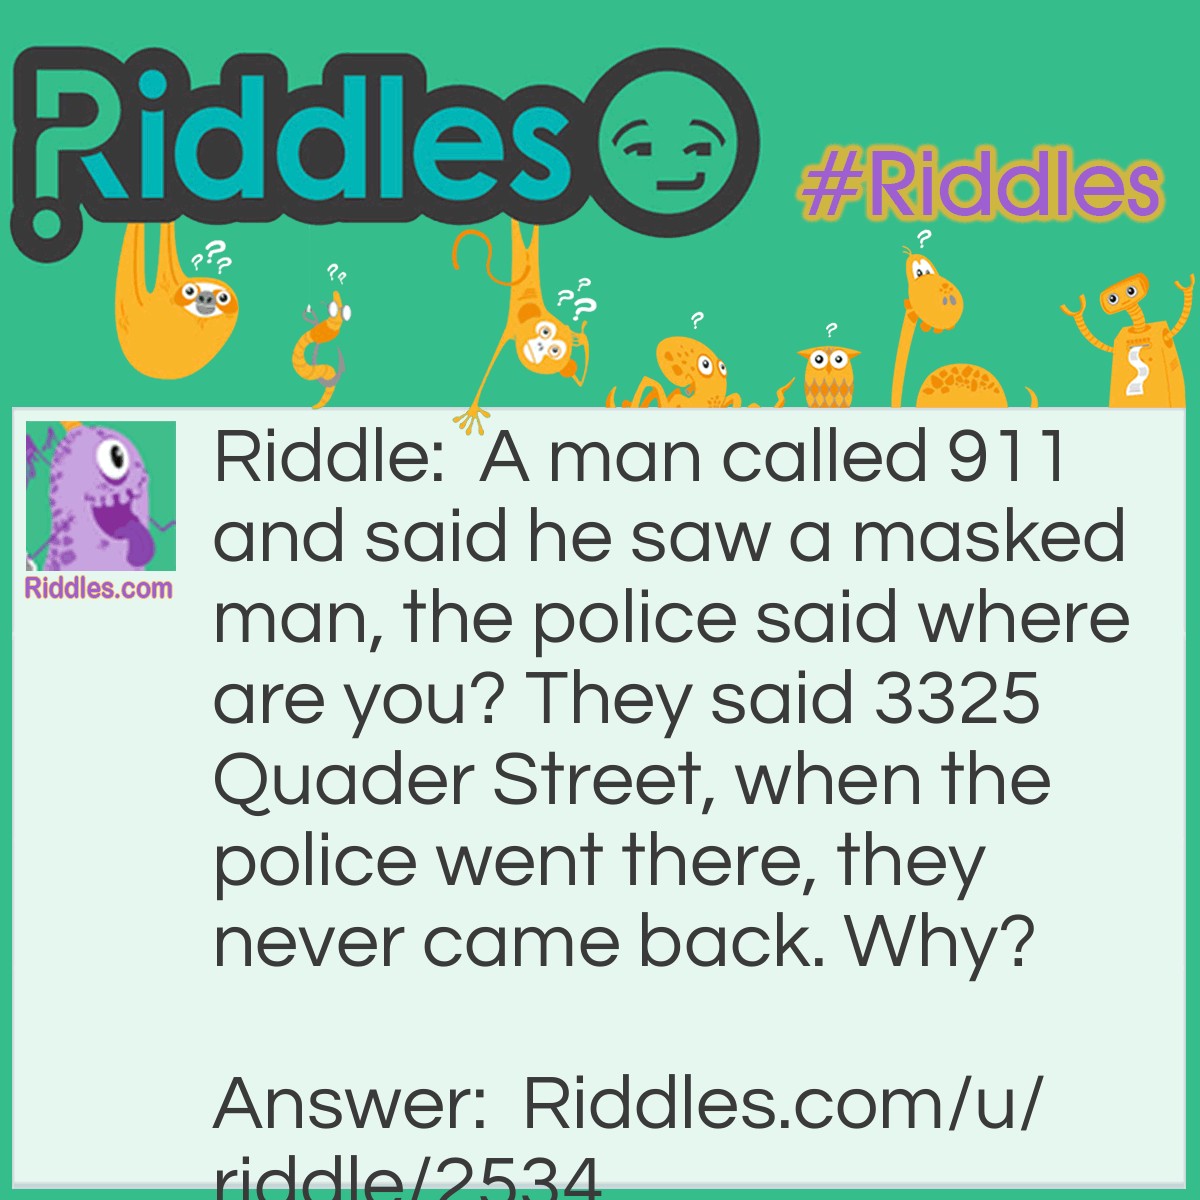 Riddle: A man called 911 and said he saw a masked man, the police said where are you? They said 3325 Quader Street, when the police went there, they never came back. Why? Answer: The man who called is the masked man.